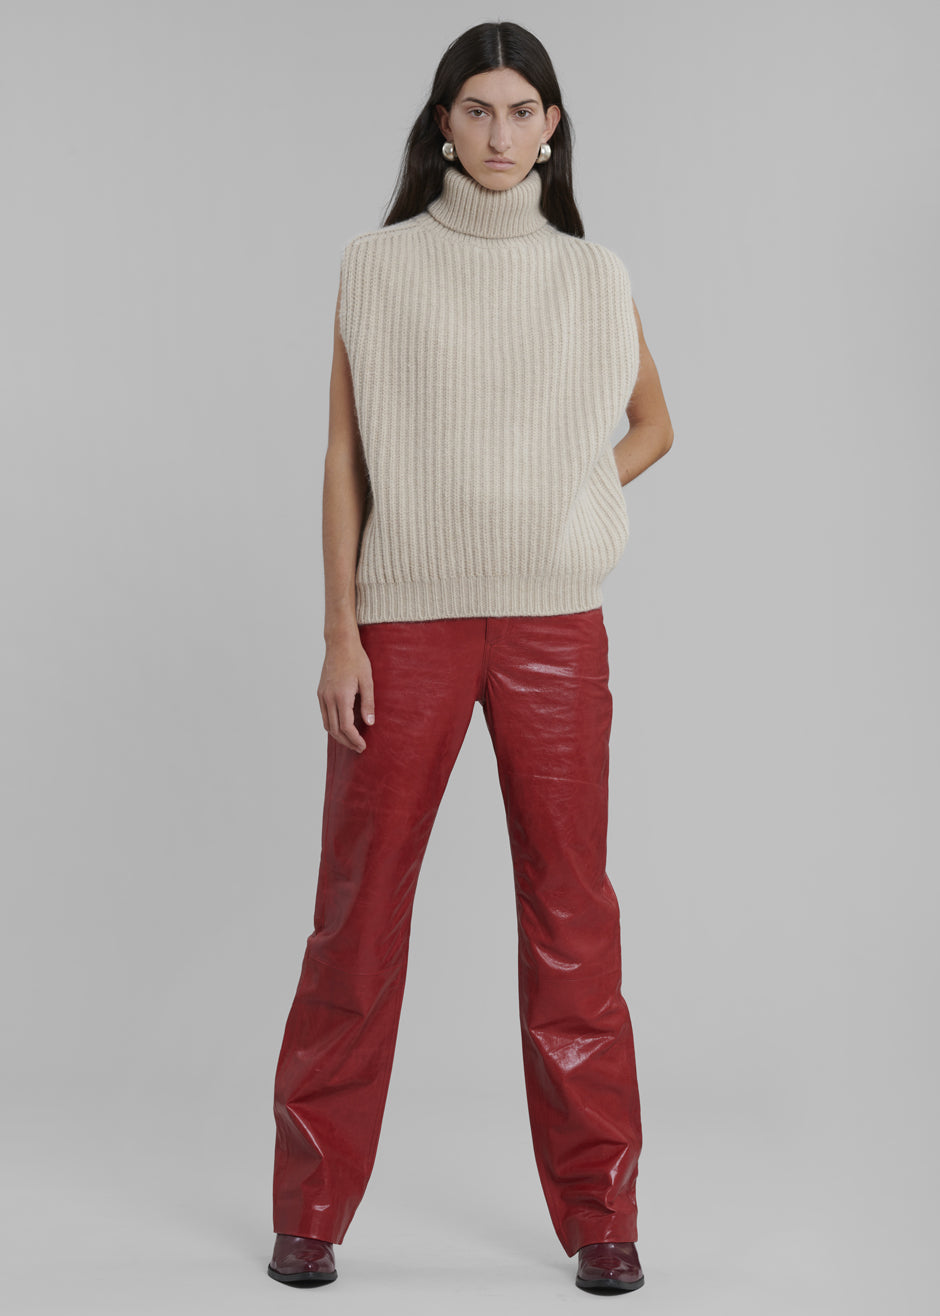 REMAIN Pants Crunchy Leather - Chili Pepper - 1